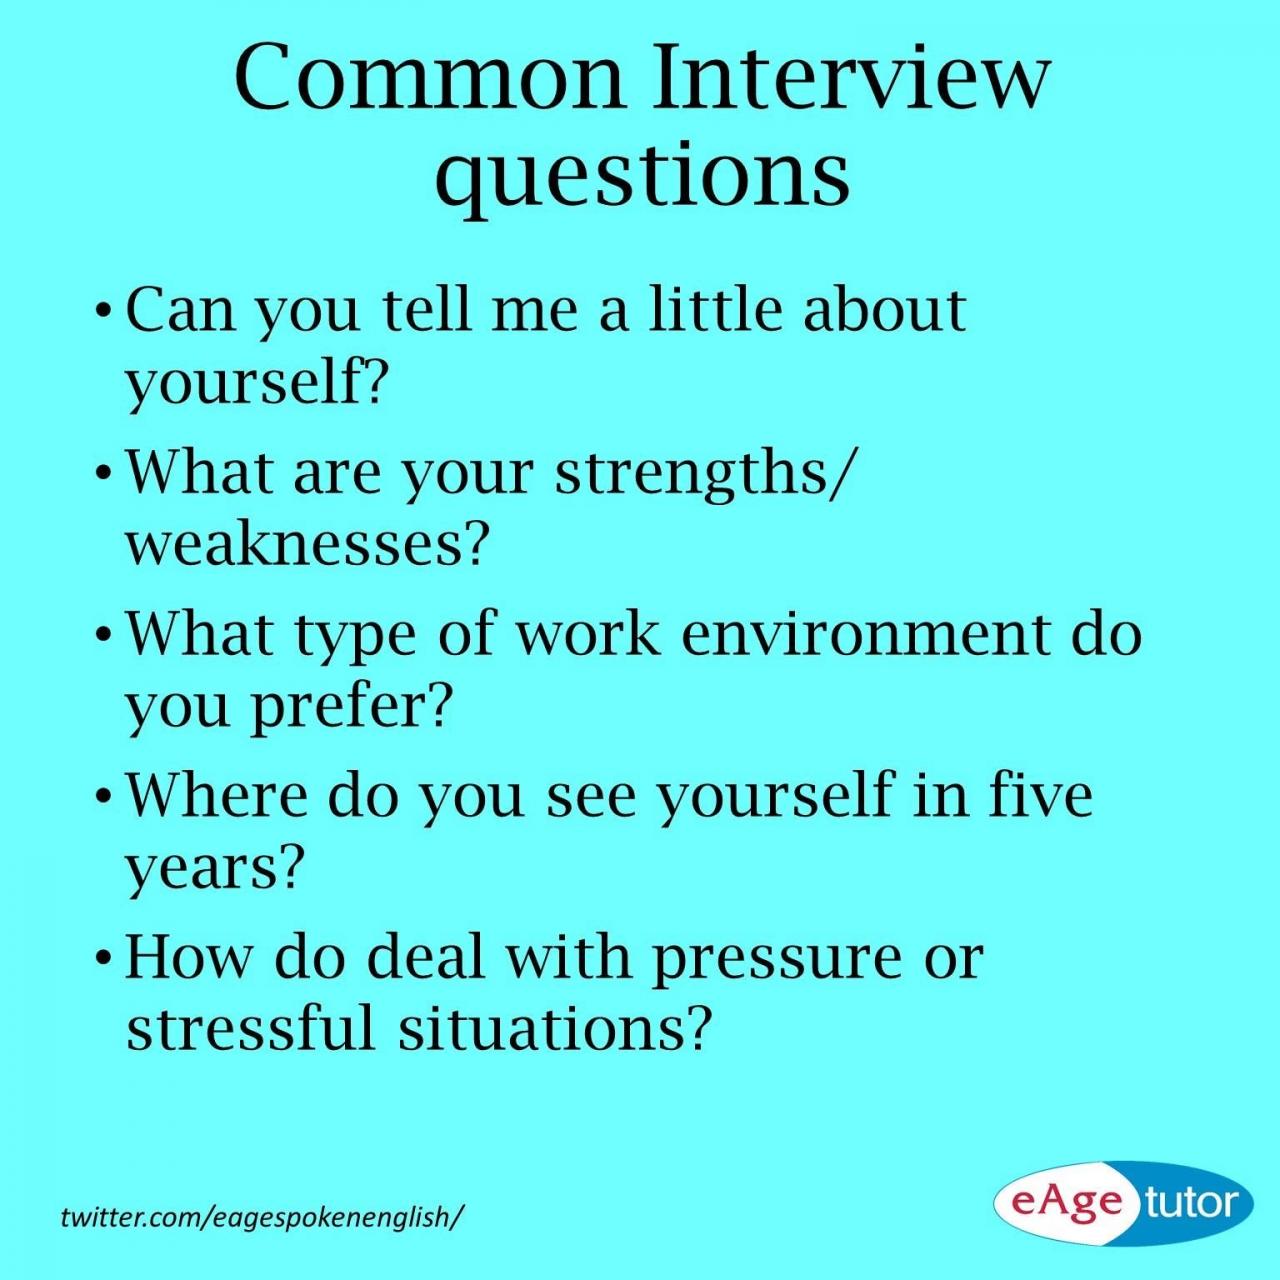 Common questions during an interview